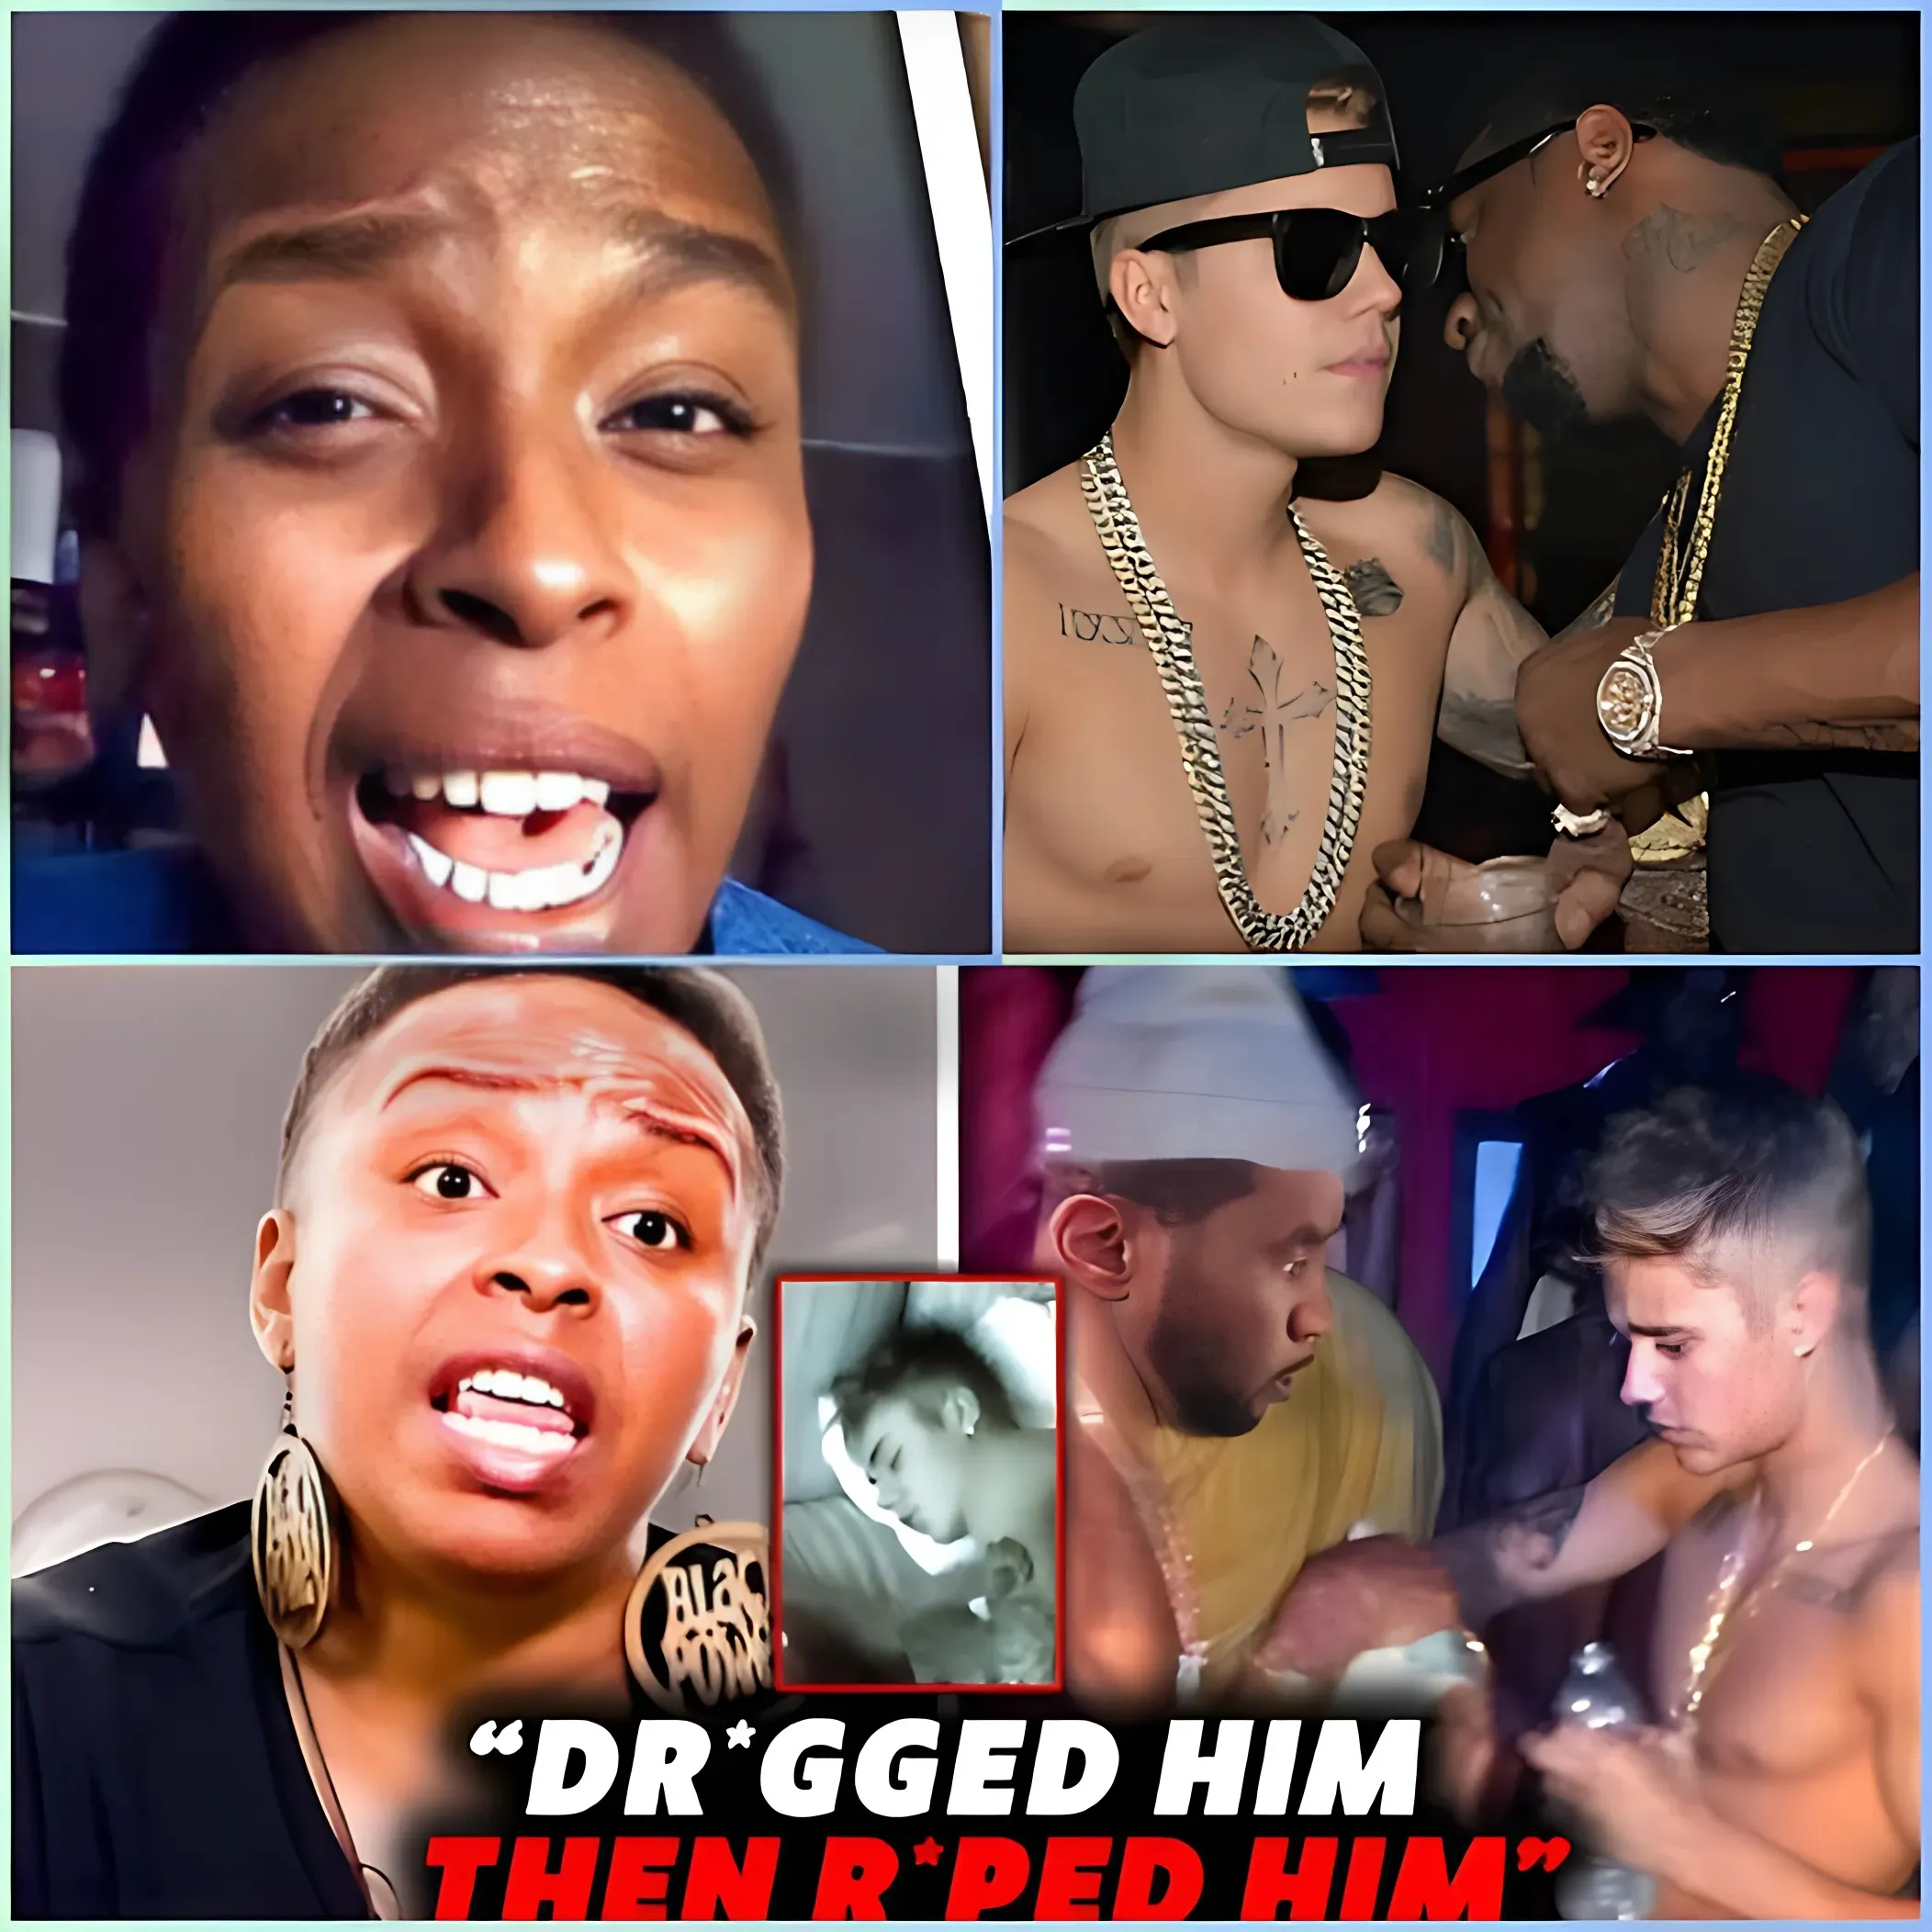 5 minutes ago, a strange sound appeared from a room of two people of the same gender: Jaguar Wright LEAKED S*X Tape Video Of Diddy FORCING Justin Bieber! 